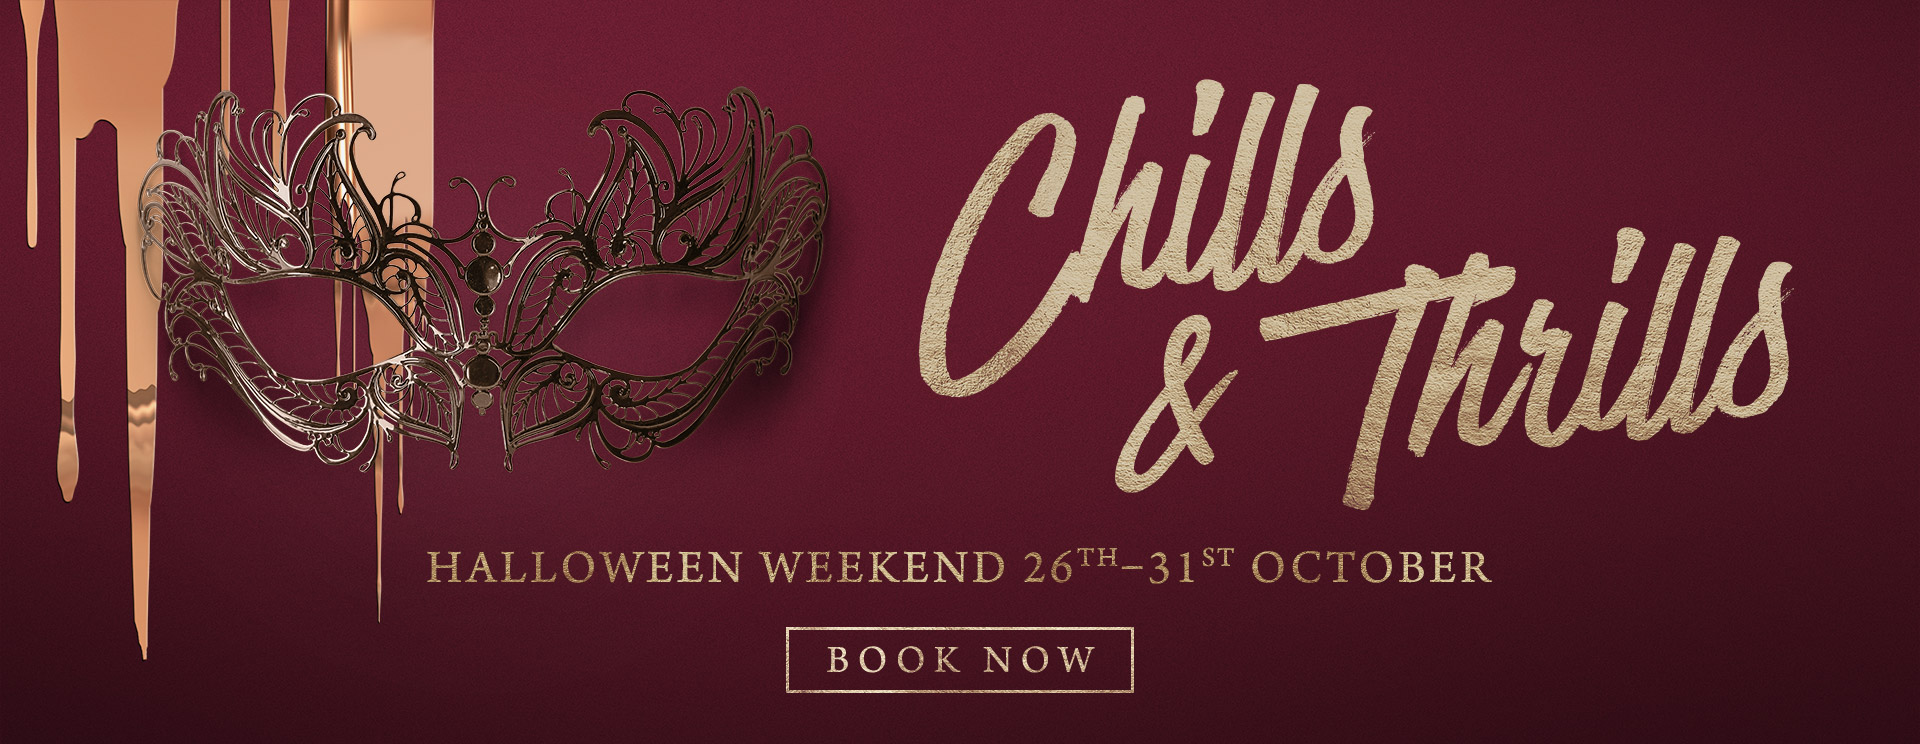 Chills & Thrills this Halloween at The Dukes Head